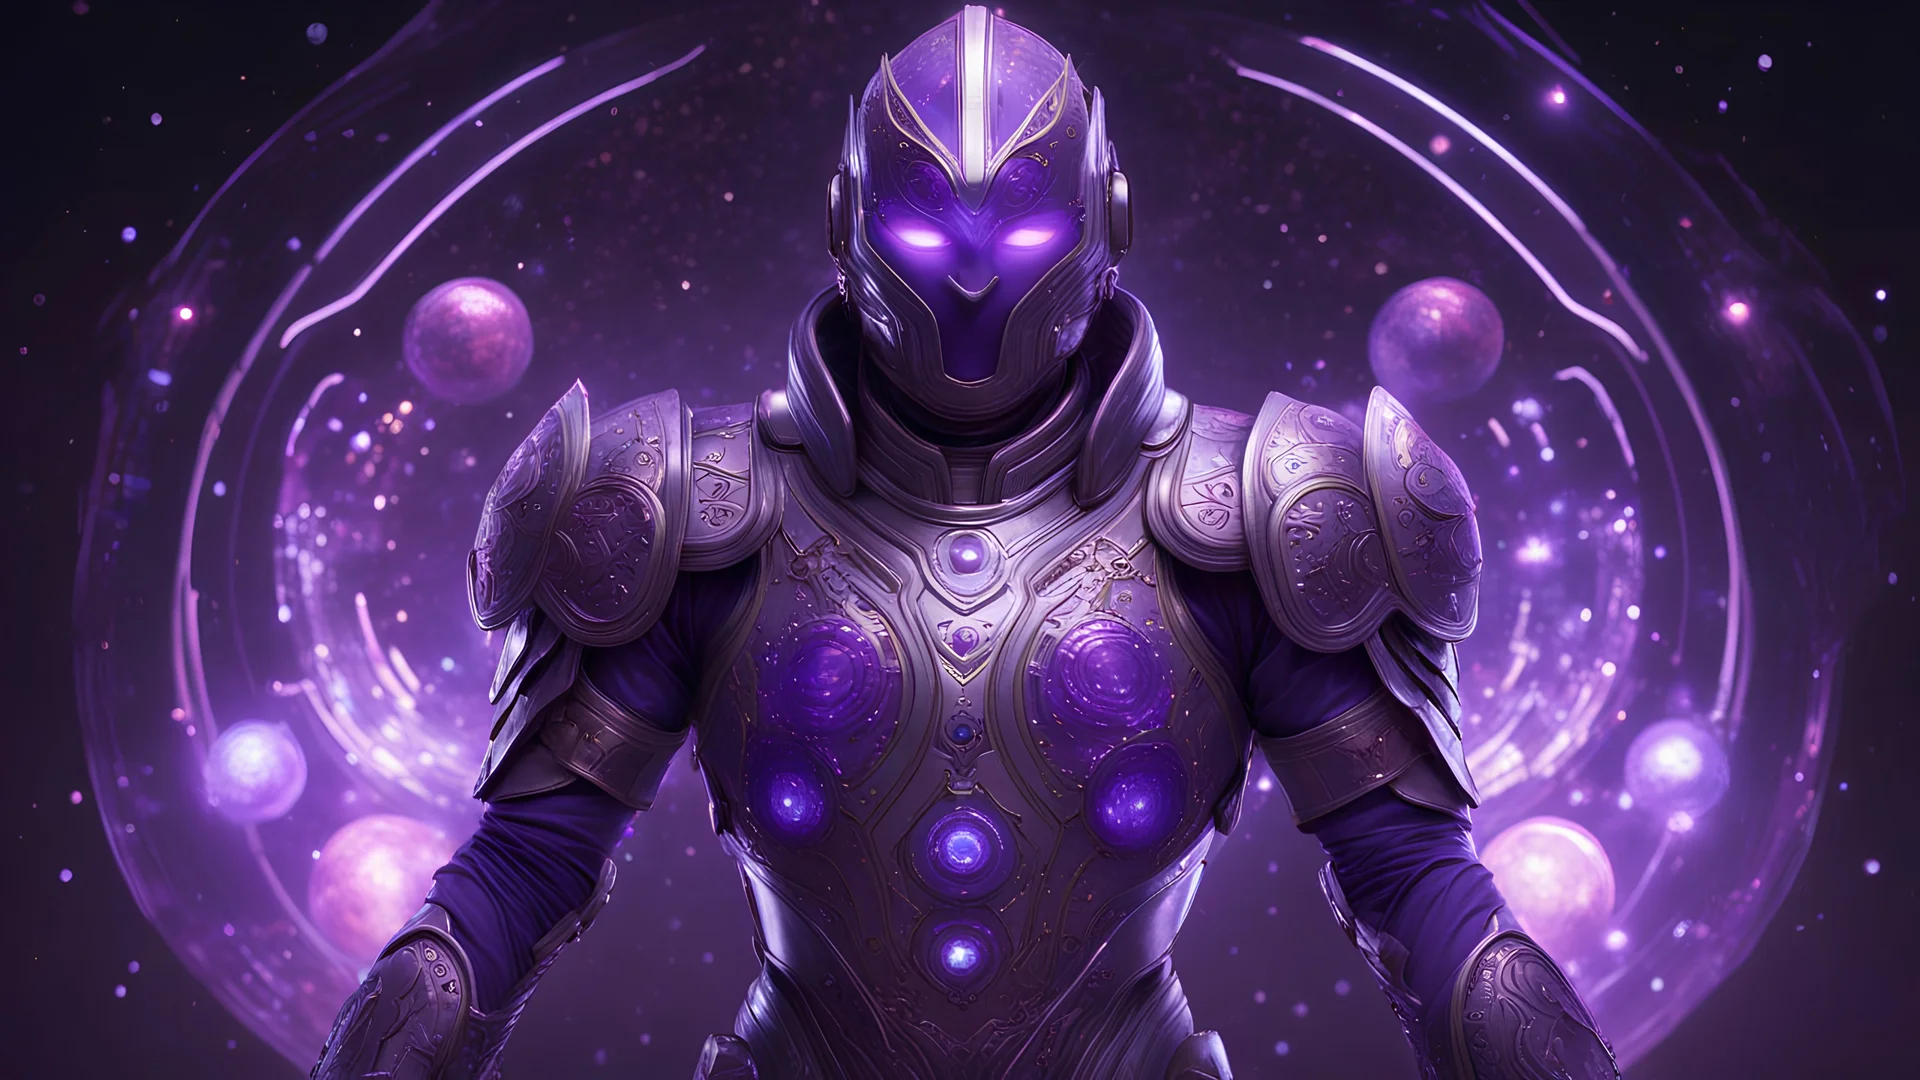 A figure clad in a suit of sleek, purple armor adorned with intricate circuitry and cosmic motifs. The suit shimmers with a faint luminescence, reflecting the power of the cosmos harnessed by its wearer. Embedded within the armor are pulsating orbs of gravitational energy, each one representing the controller's mastery over the forces of gravity. Their eyes glow with an otherworldly hue, a testament to the immense power they wield over space and time. full body